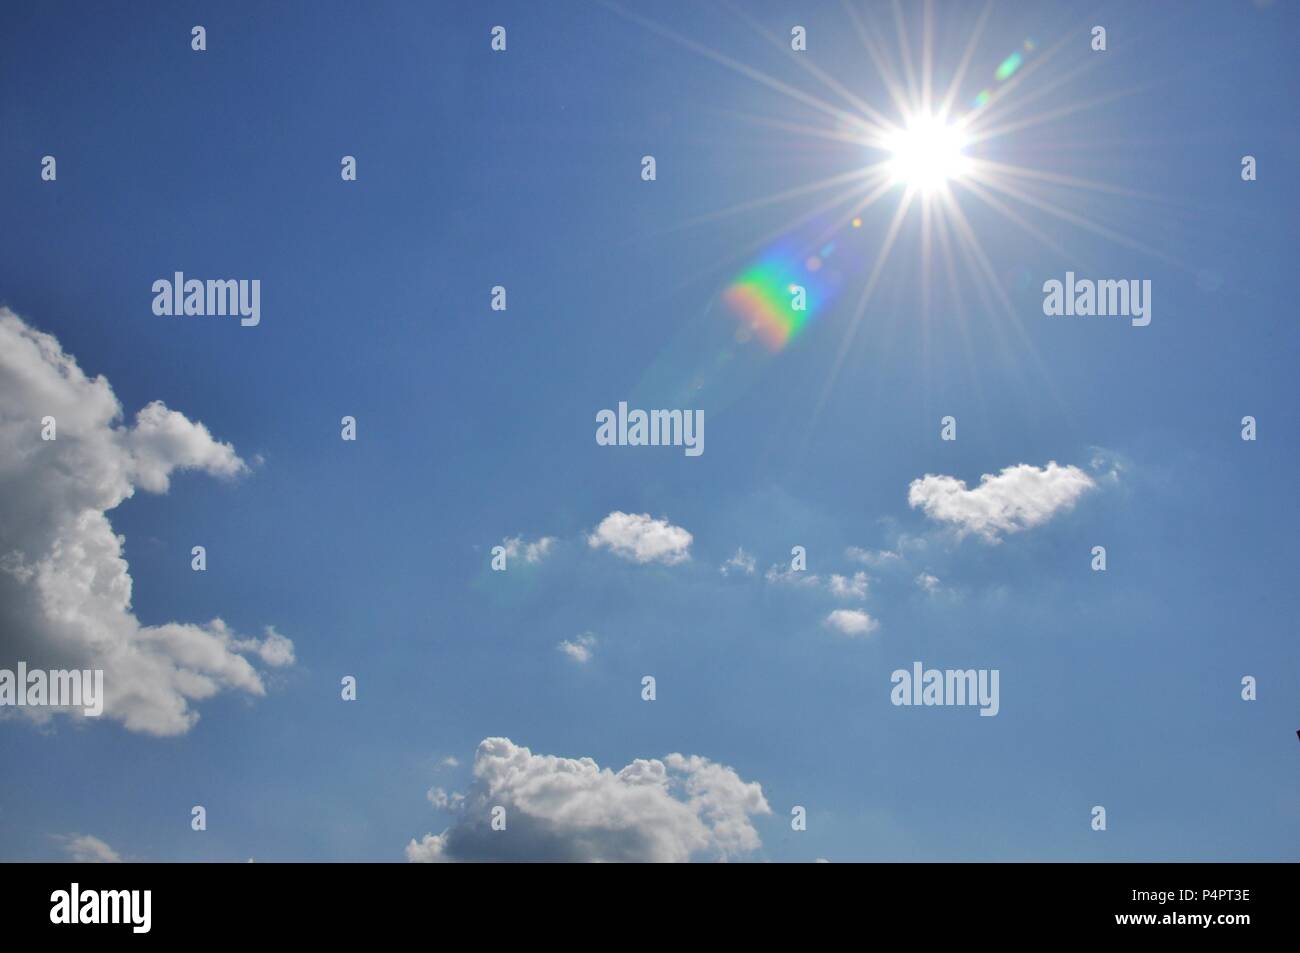 Cloudscape with a blue sky and the sun shining with rainbow reflections Stock Photo